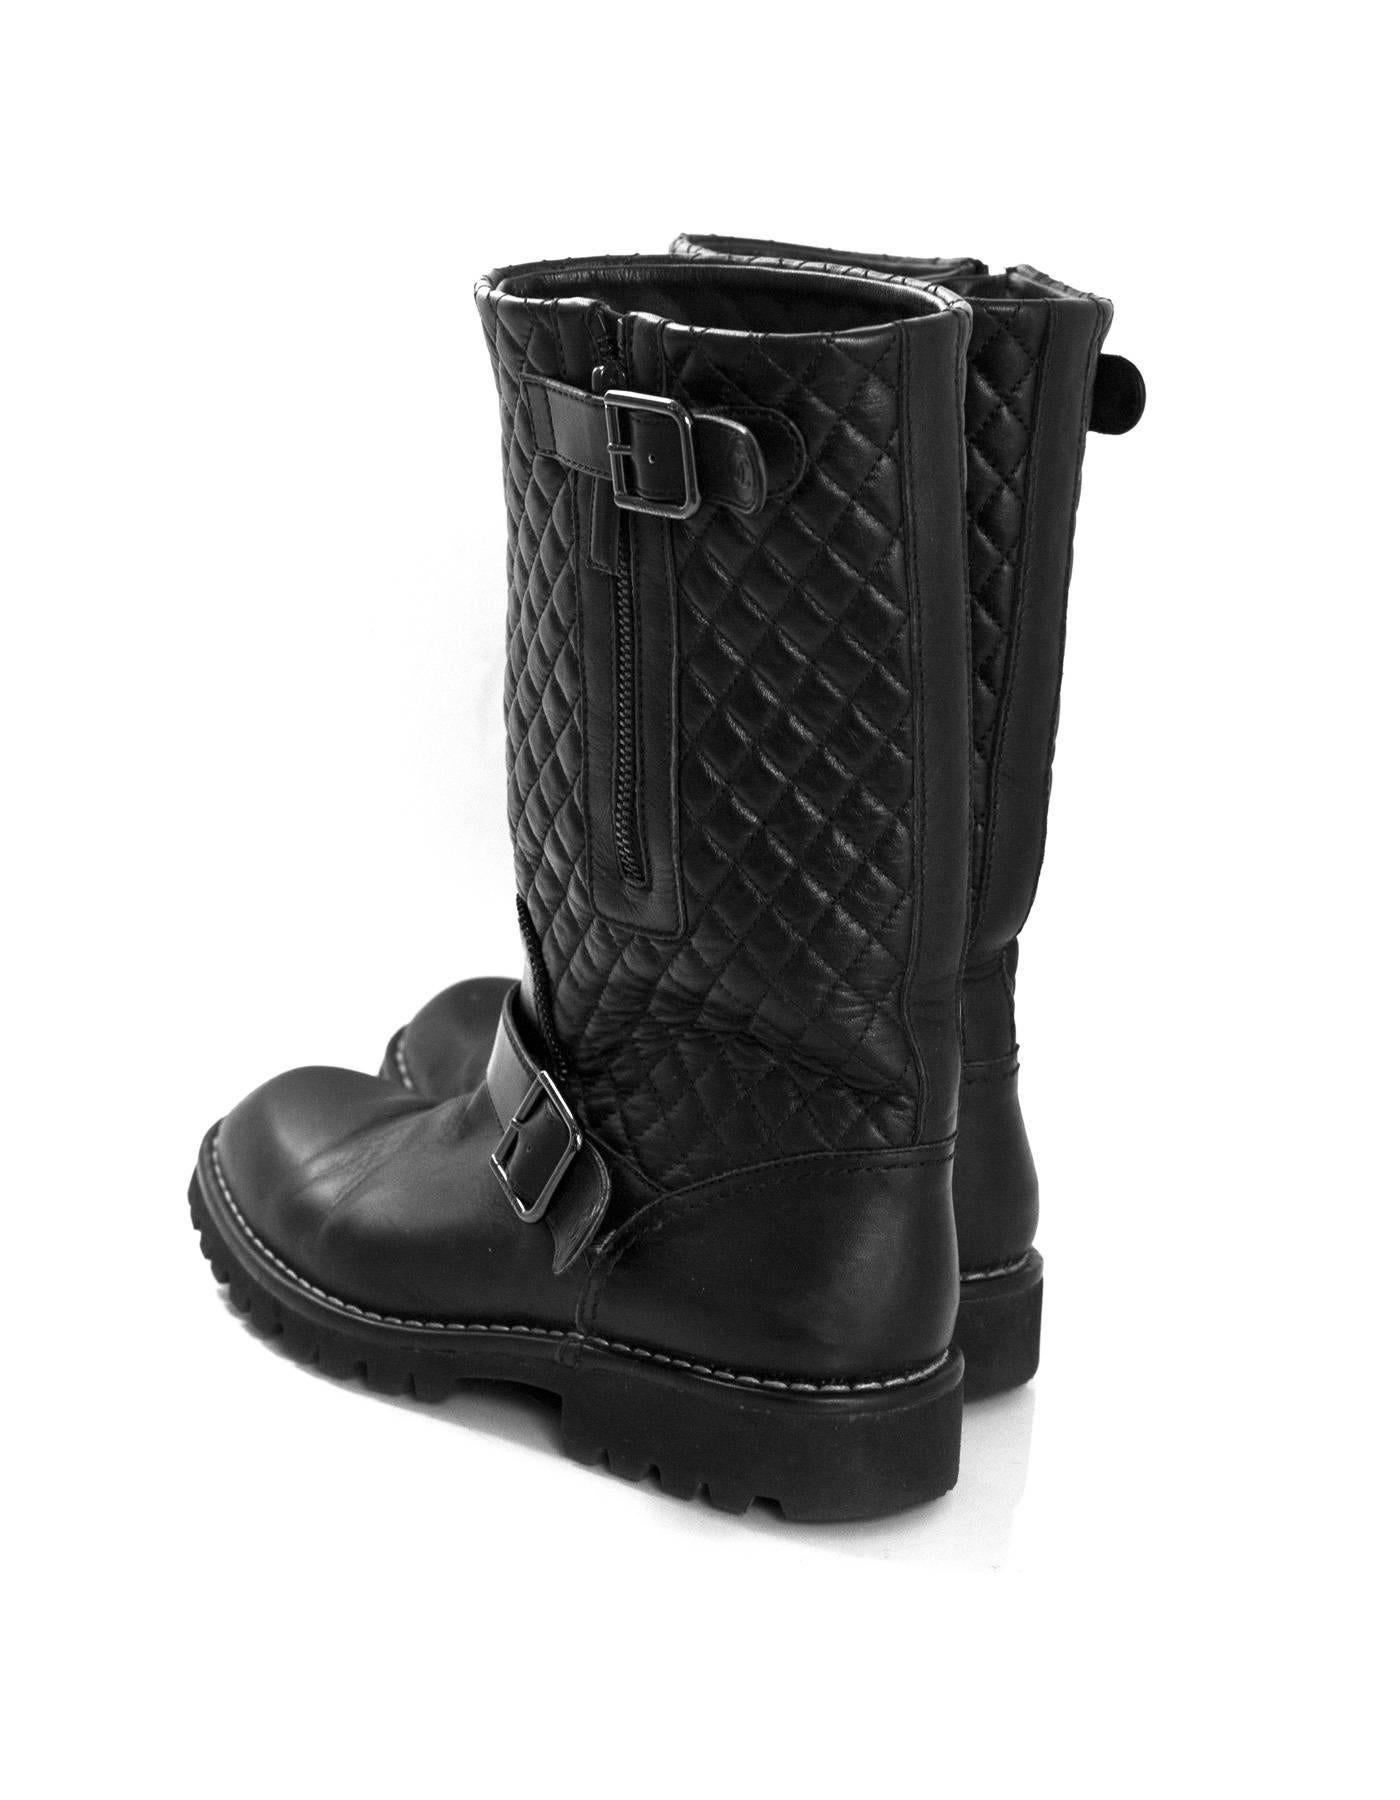 Women's Chanel Black Quilted Leather Biker Boots Sz 38.5